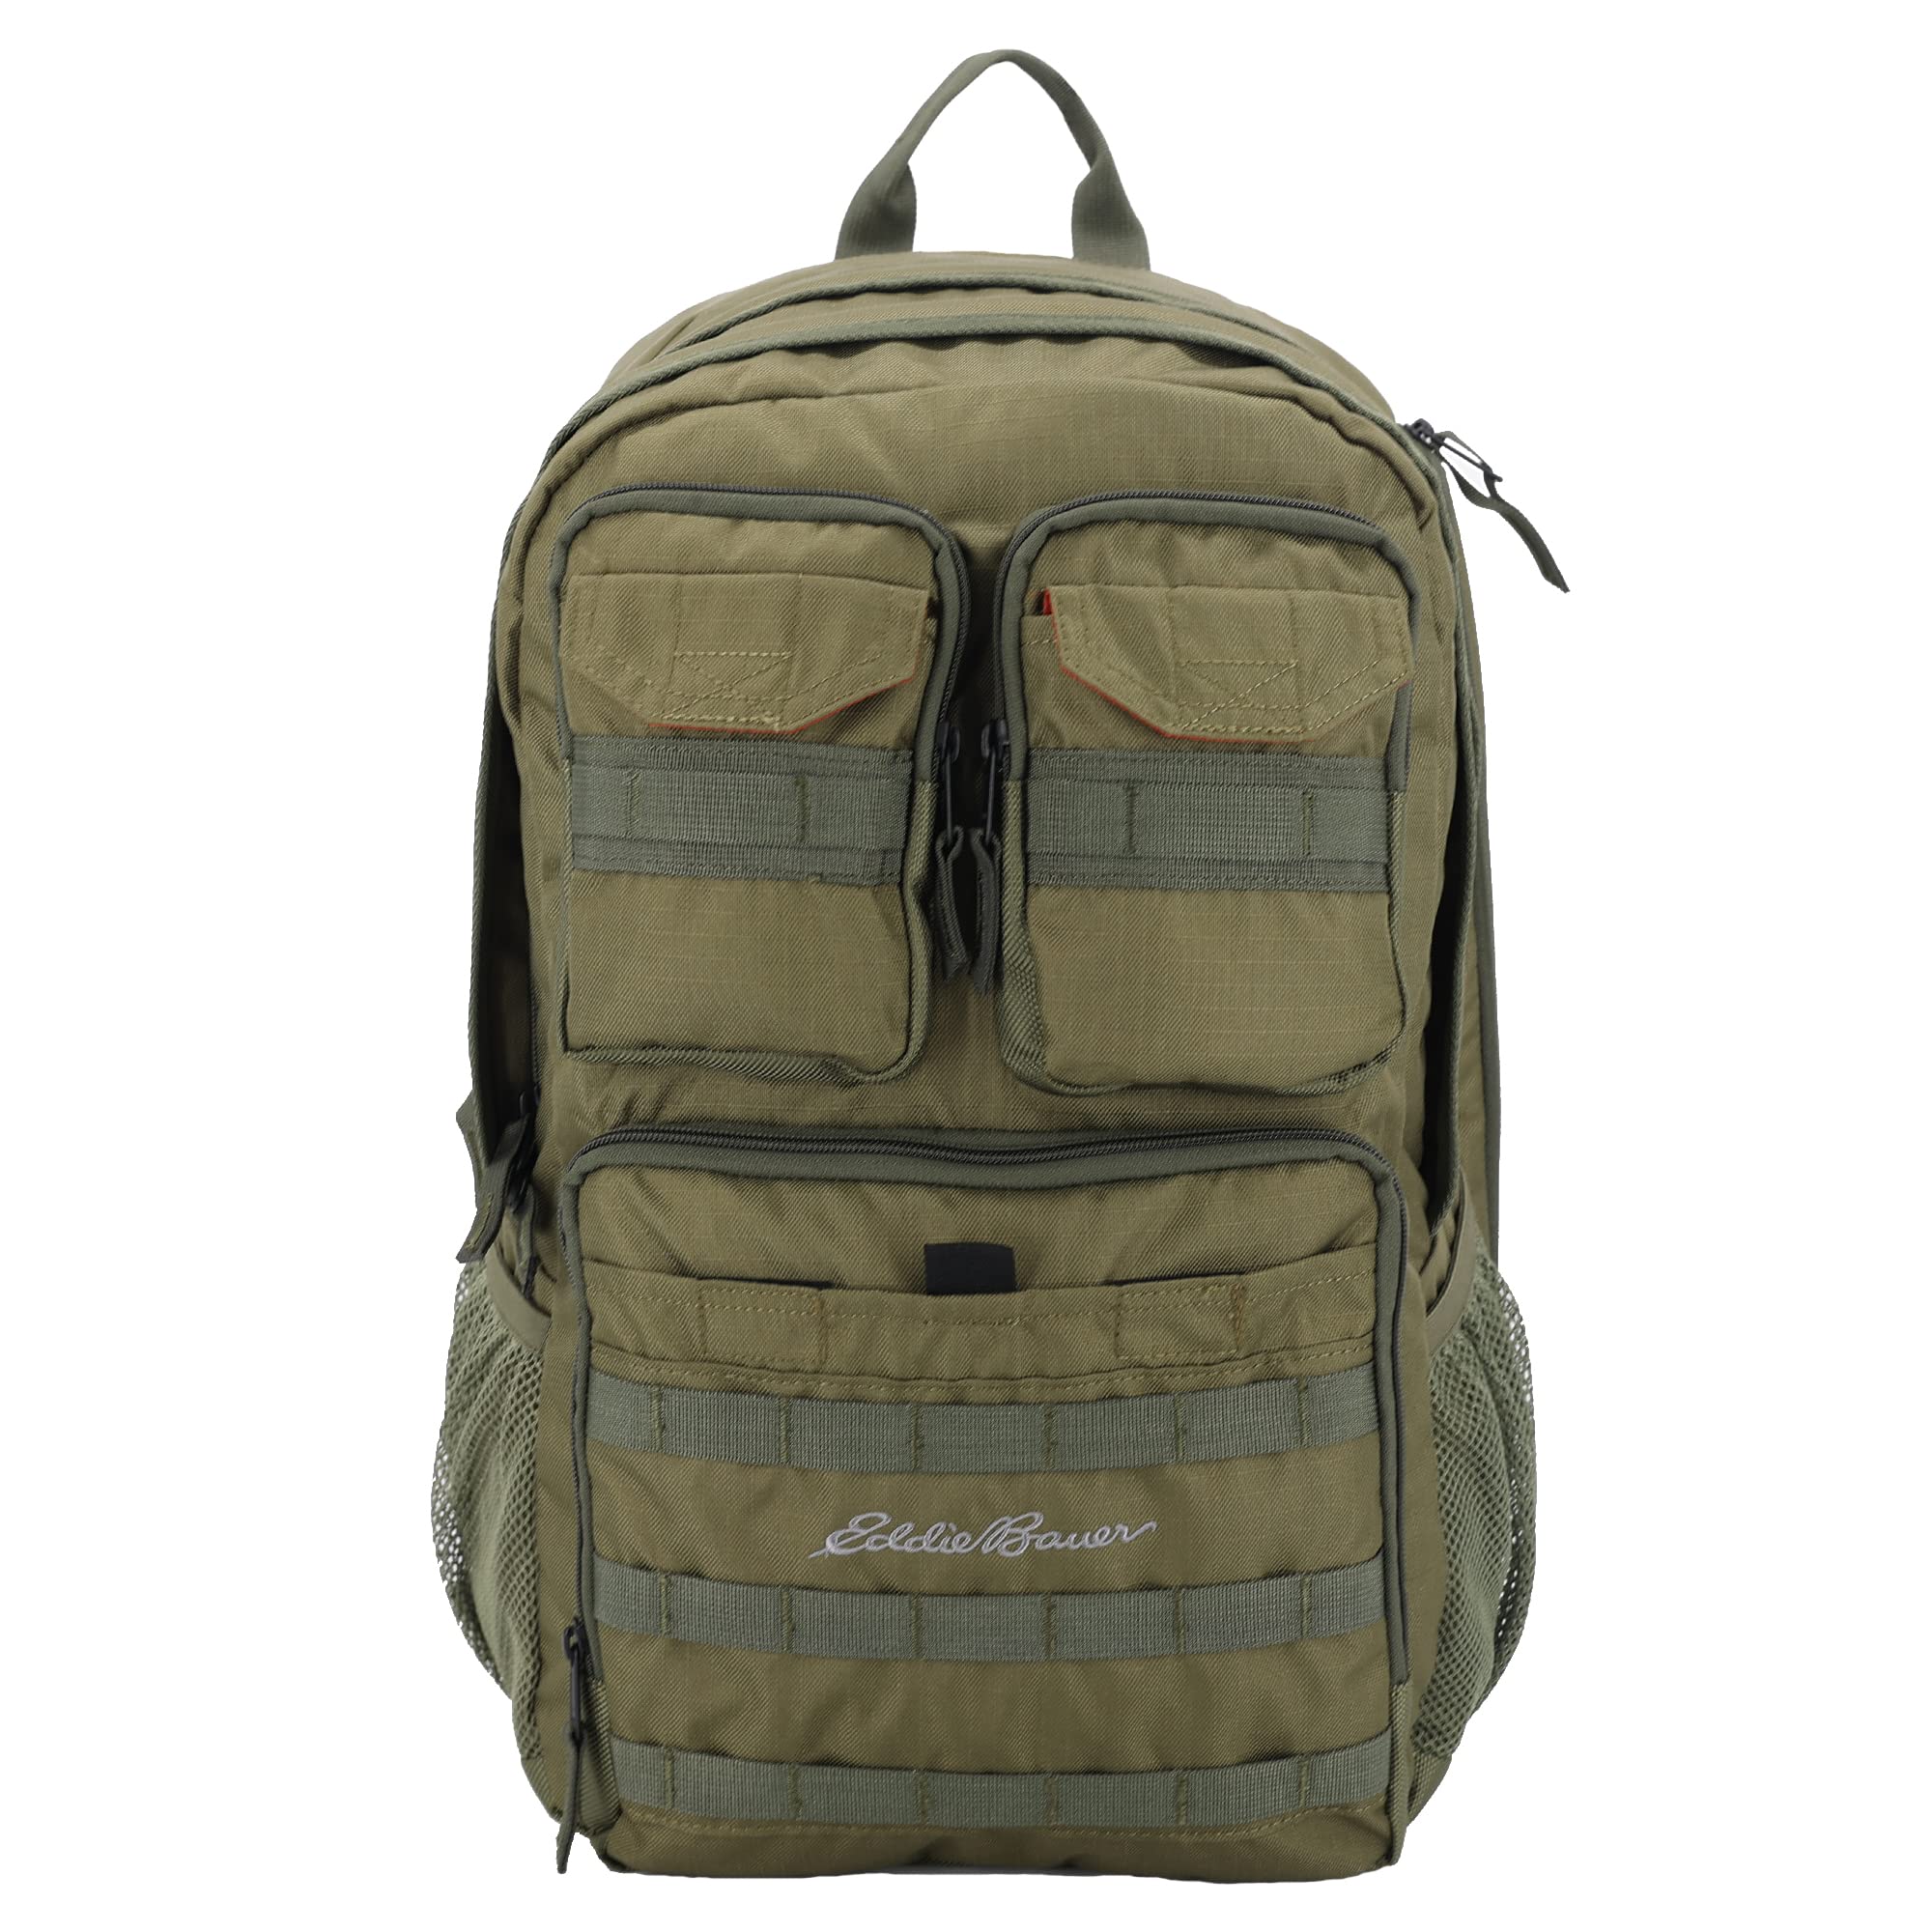 Eddie Bauer Cargo Backpack 30L Access Computer Sleeve and Dual Mesh Side Pockets, Moss Grey